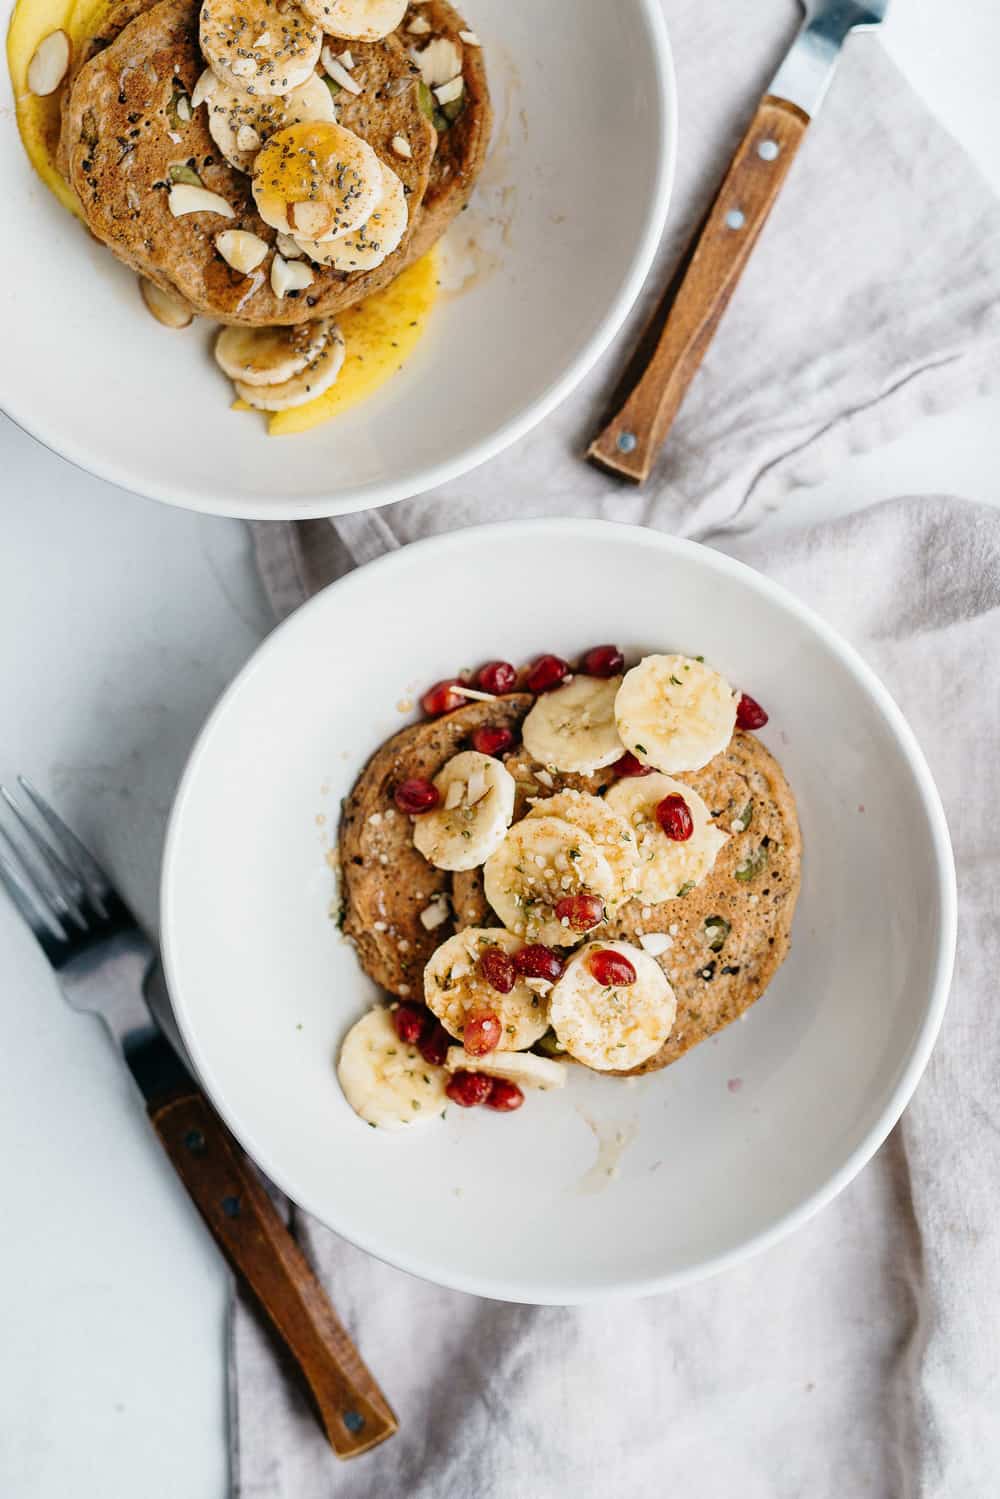 Gluten free super seed pancakes by Dolly and Oatmeal / 10 clean-eating food bloggers we love